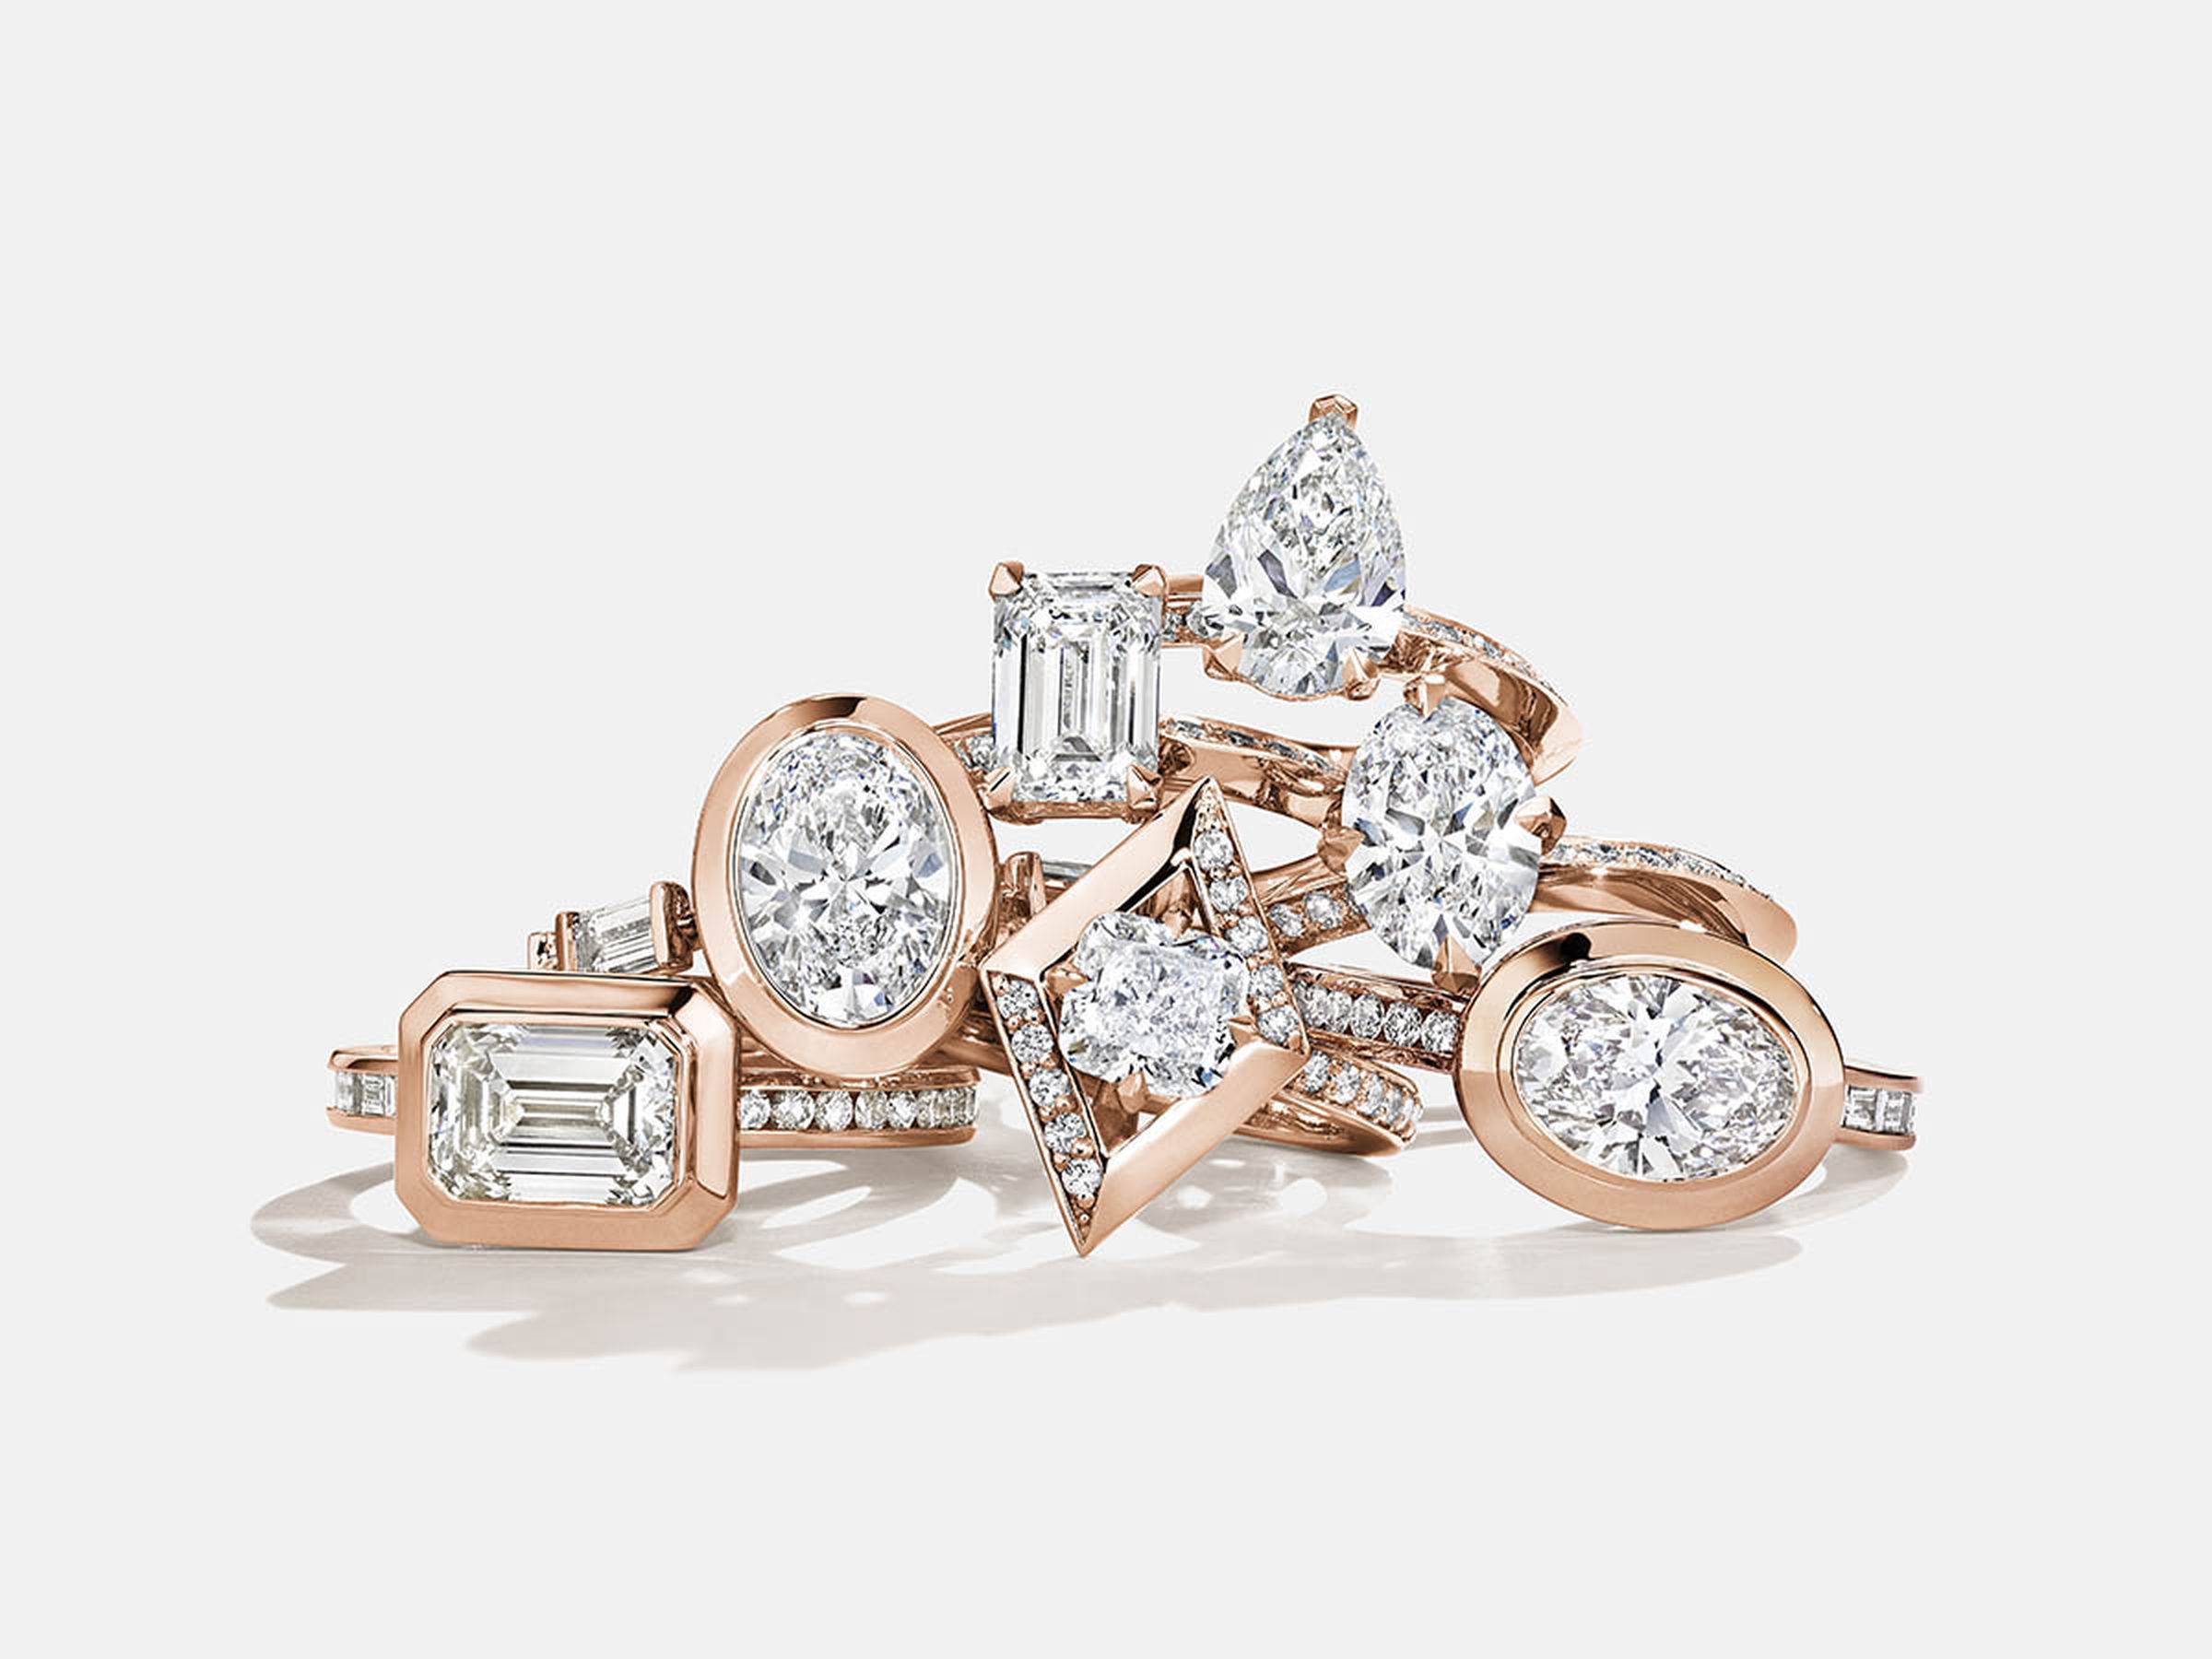 A pile of diamond and rose gold rings against a white background.